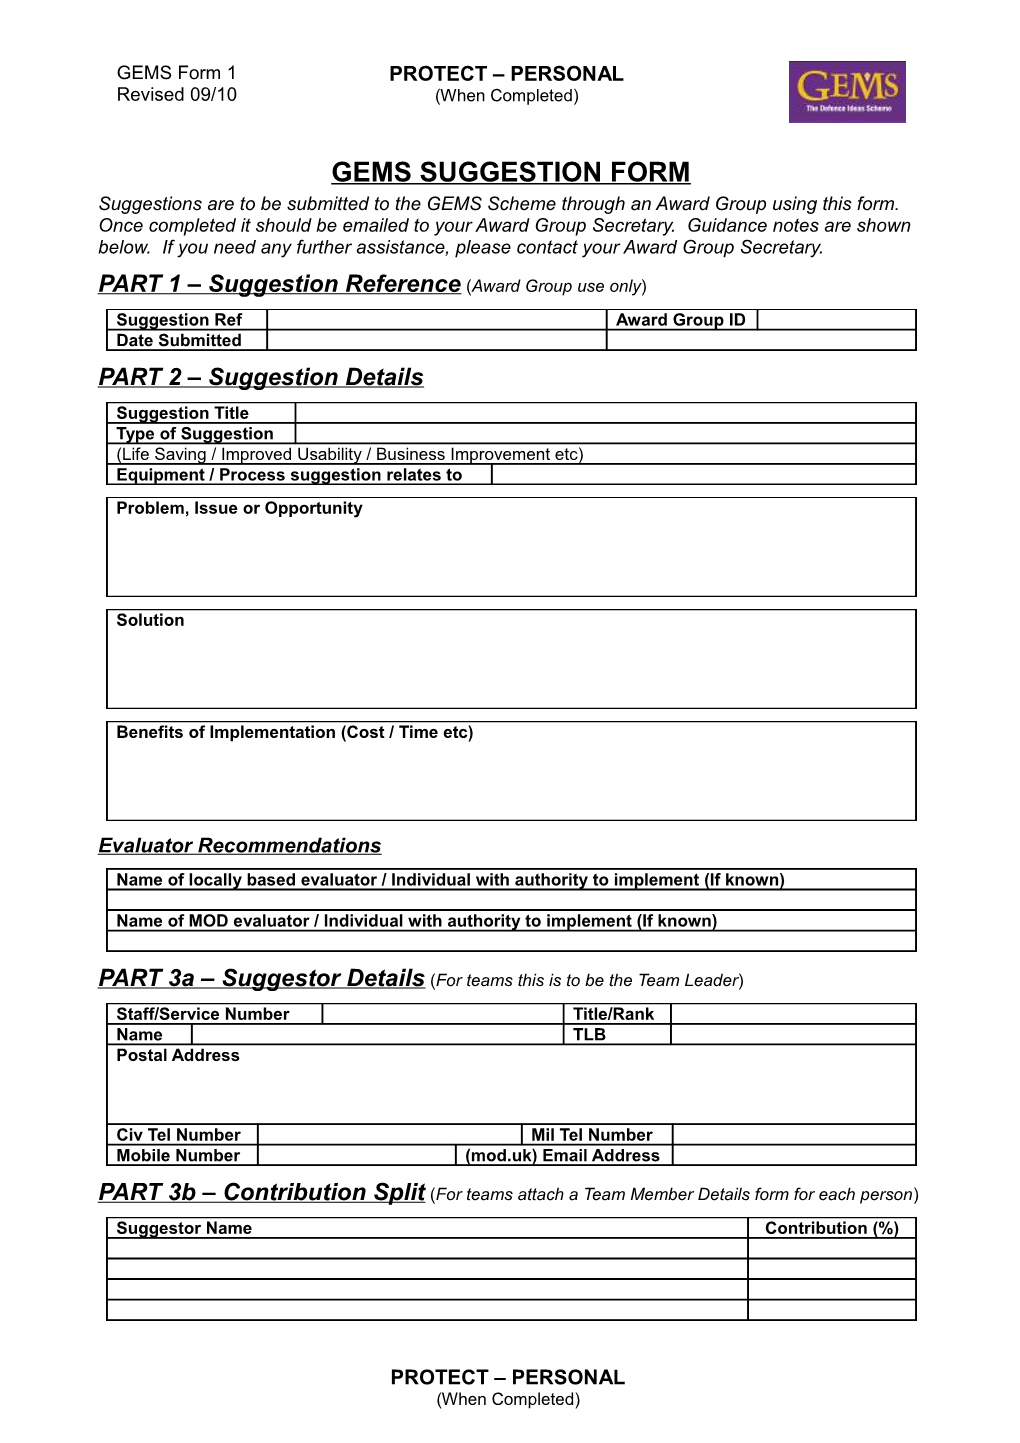 P-P GEMS Form 1 - Suggestion Form (Template)